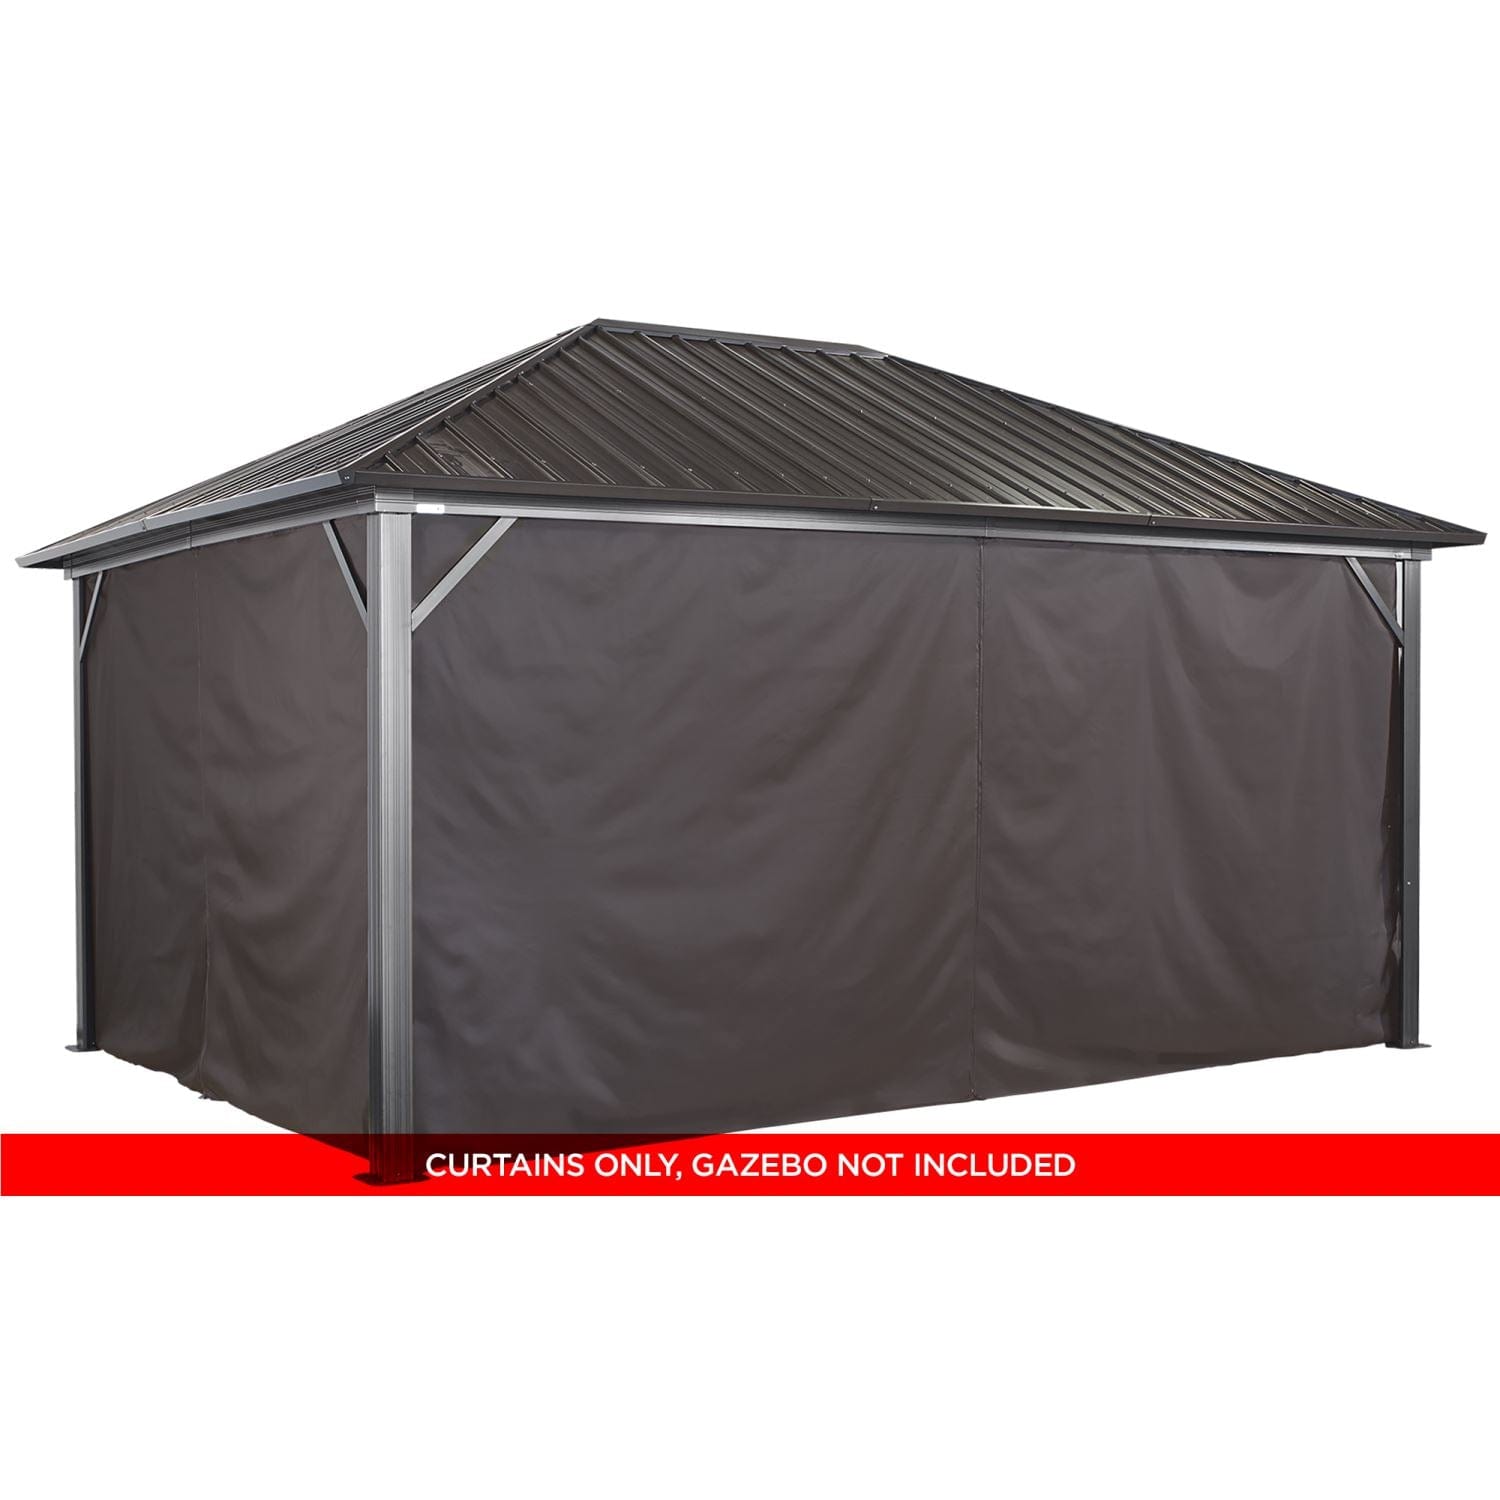 Sojag Curtains for Genova 12' x 16' Brown Polyester - Gazebo Not Included - mygreenhousestore.com